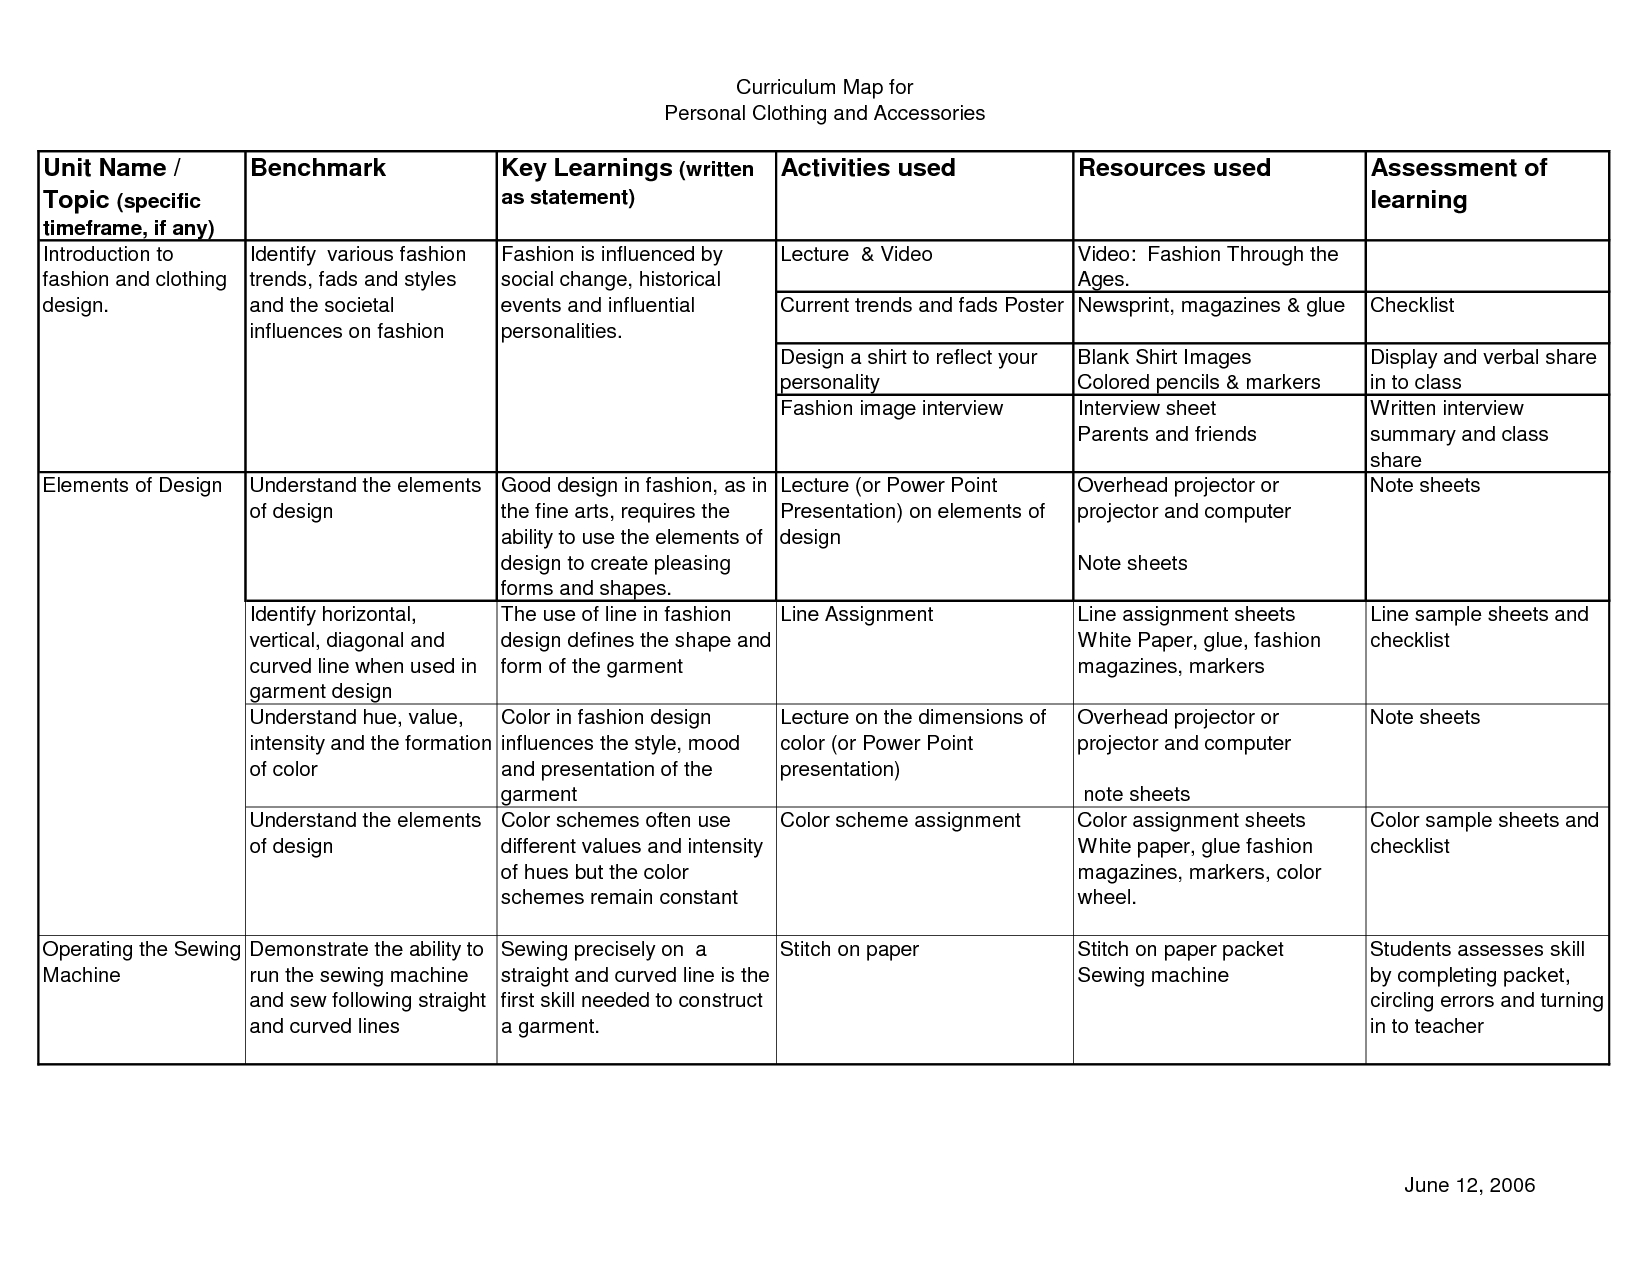 Blank Curriculum Map Template | Blank Color Wheel Worksheets Regarding Blank Curriculum Map Template